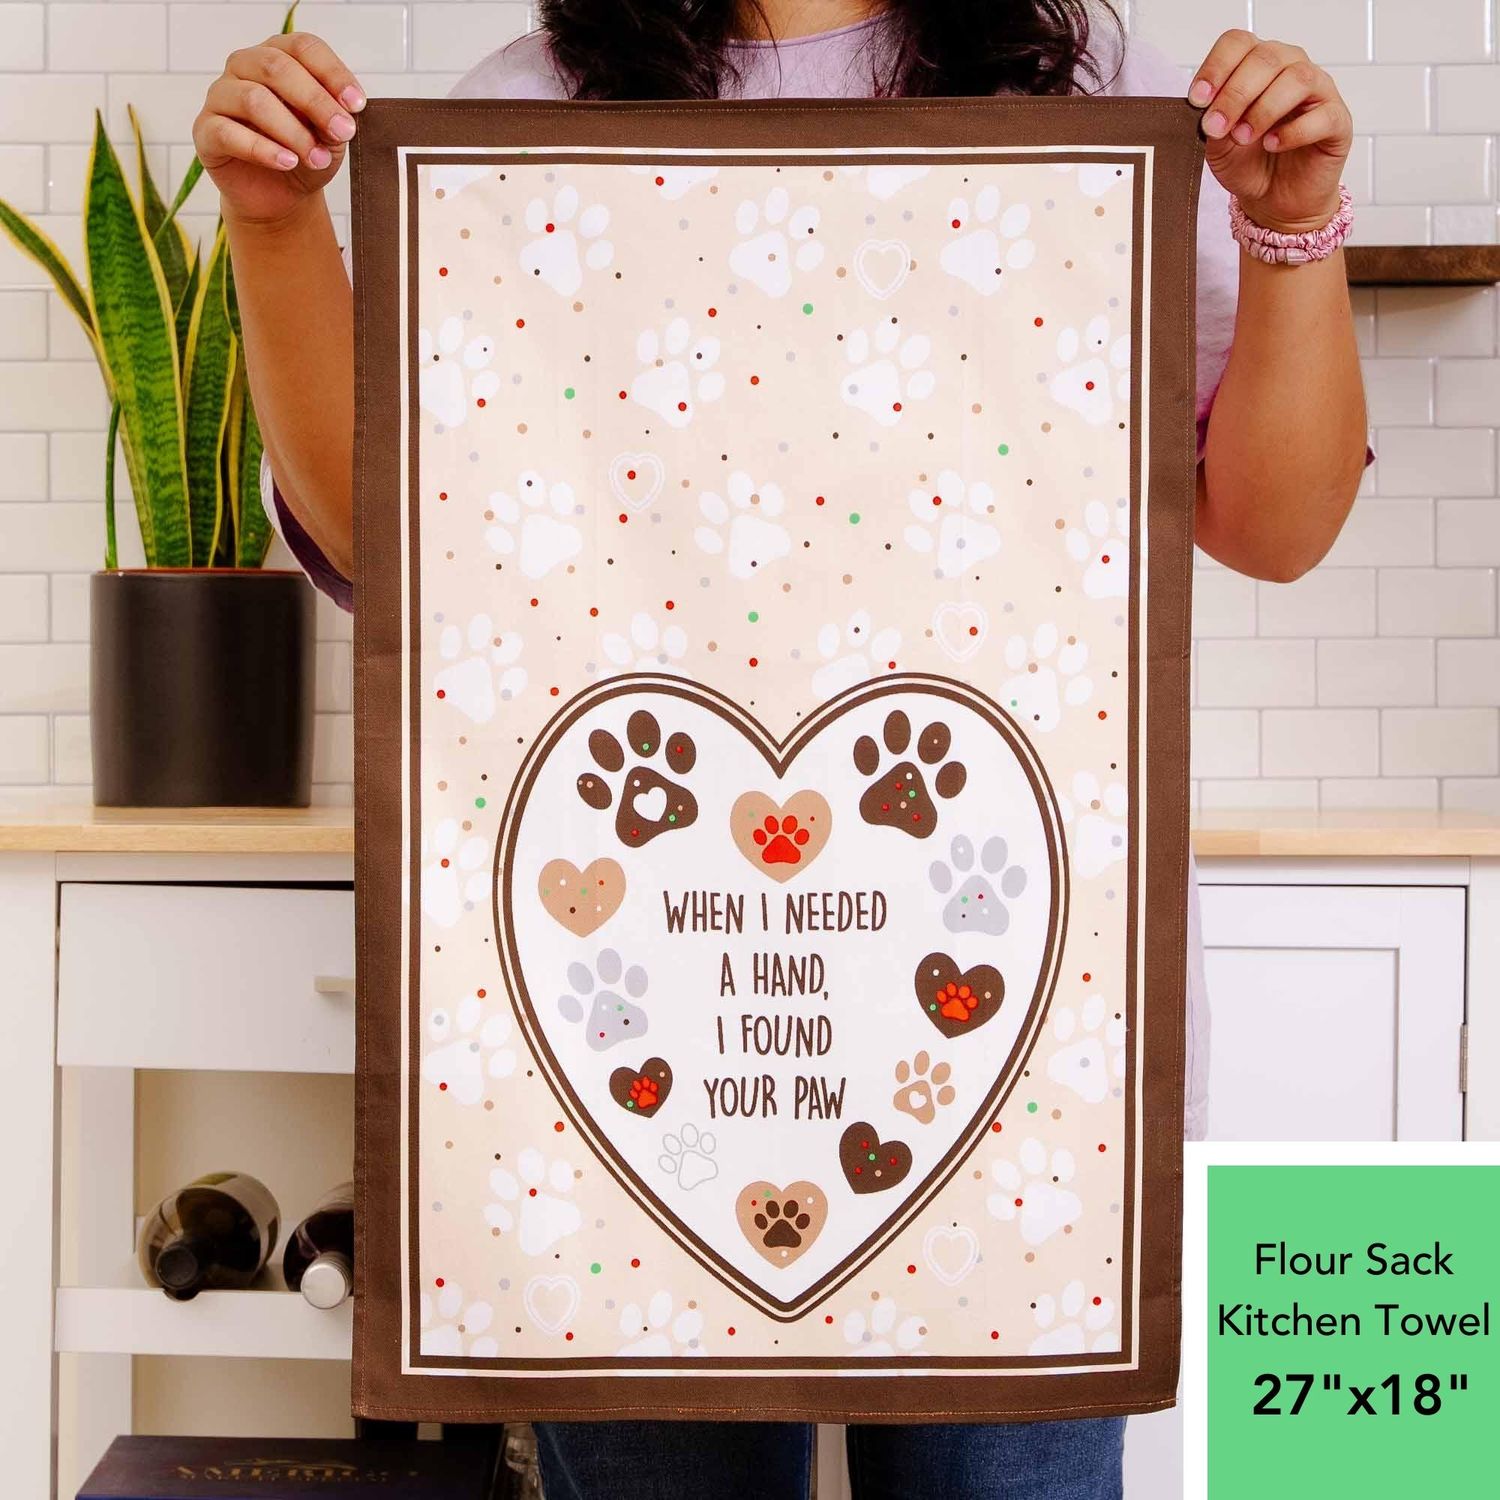 When I Needed A Hand,  I Found Your Paw – 100% Cotton Flour Sack Dog Kitchen Dish Towel 27″ x 18″